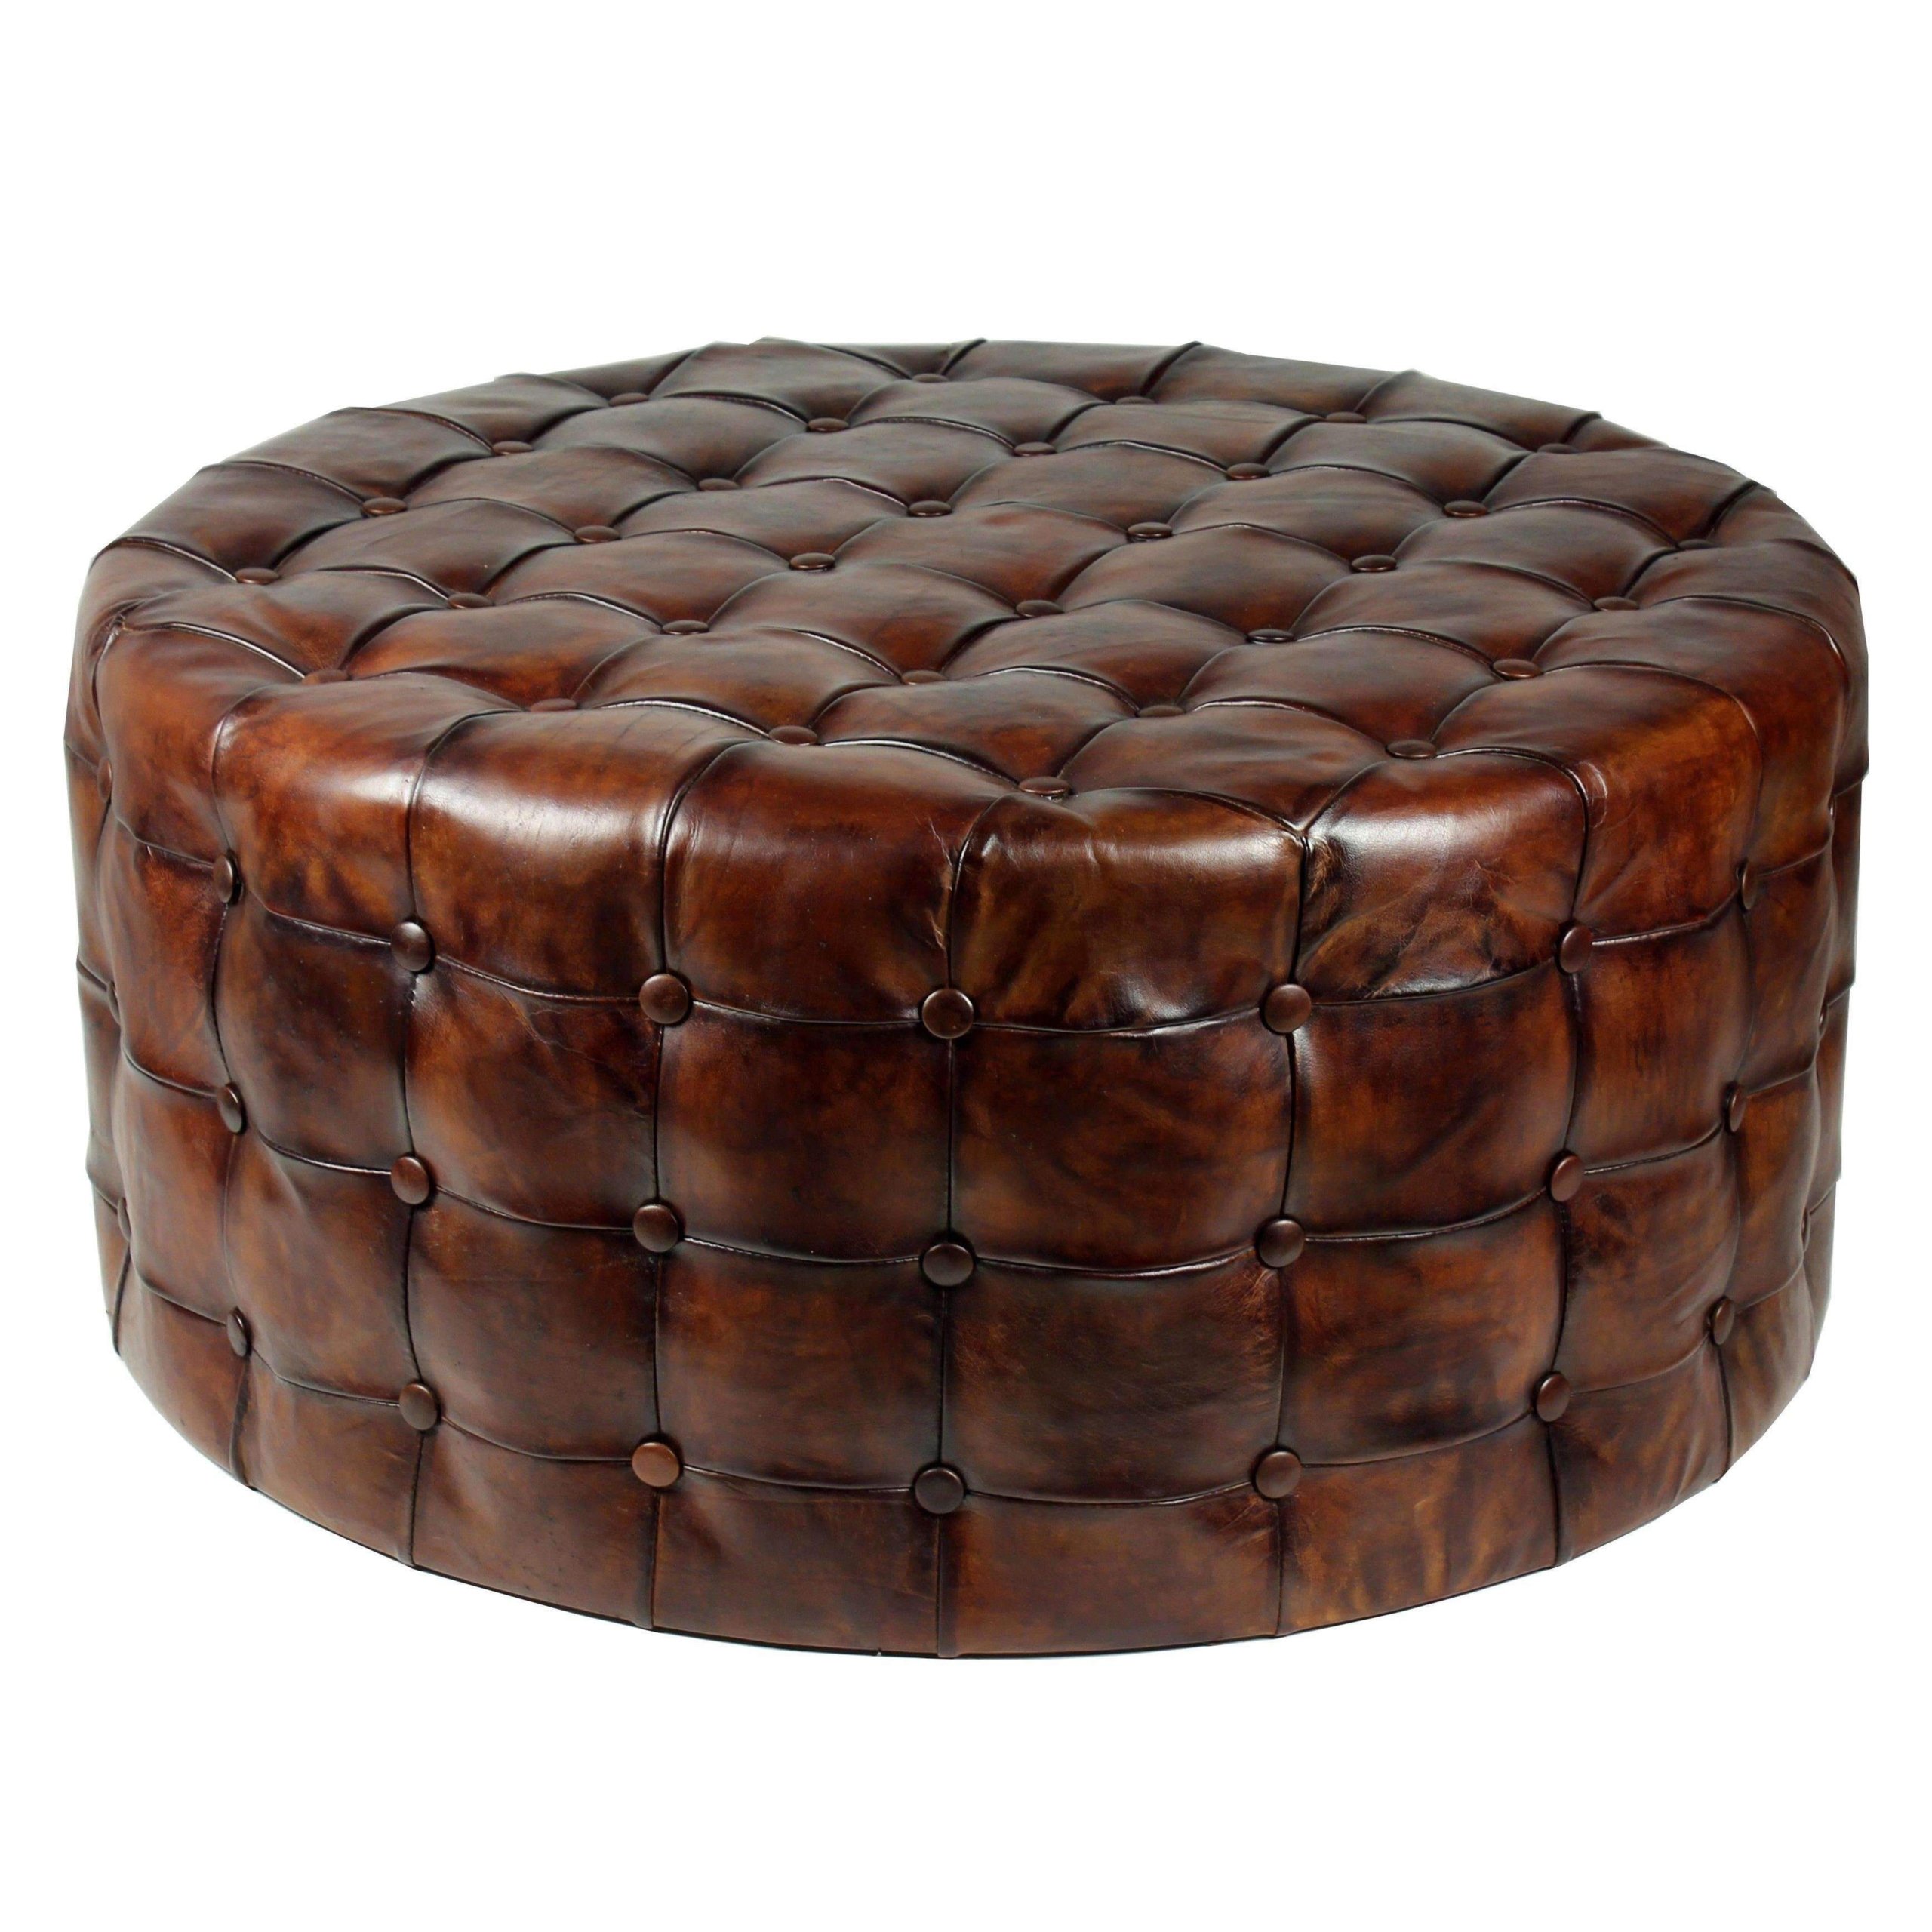 Leather Ottoman Coffee Table You Ll, Round Leather Tufted Ottoman Coffee Table